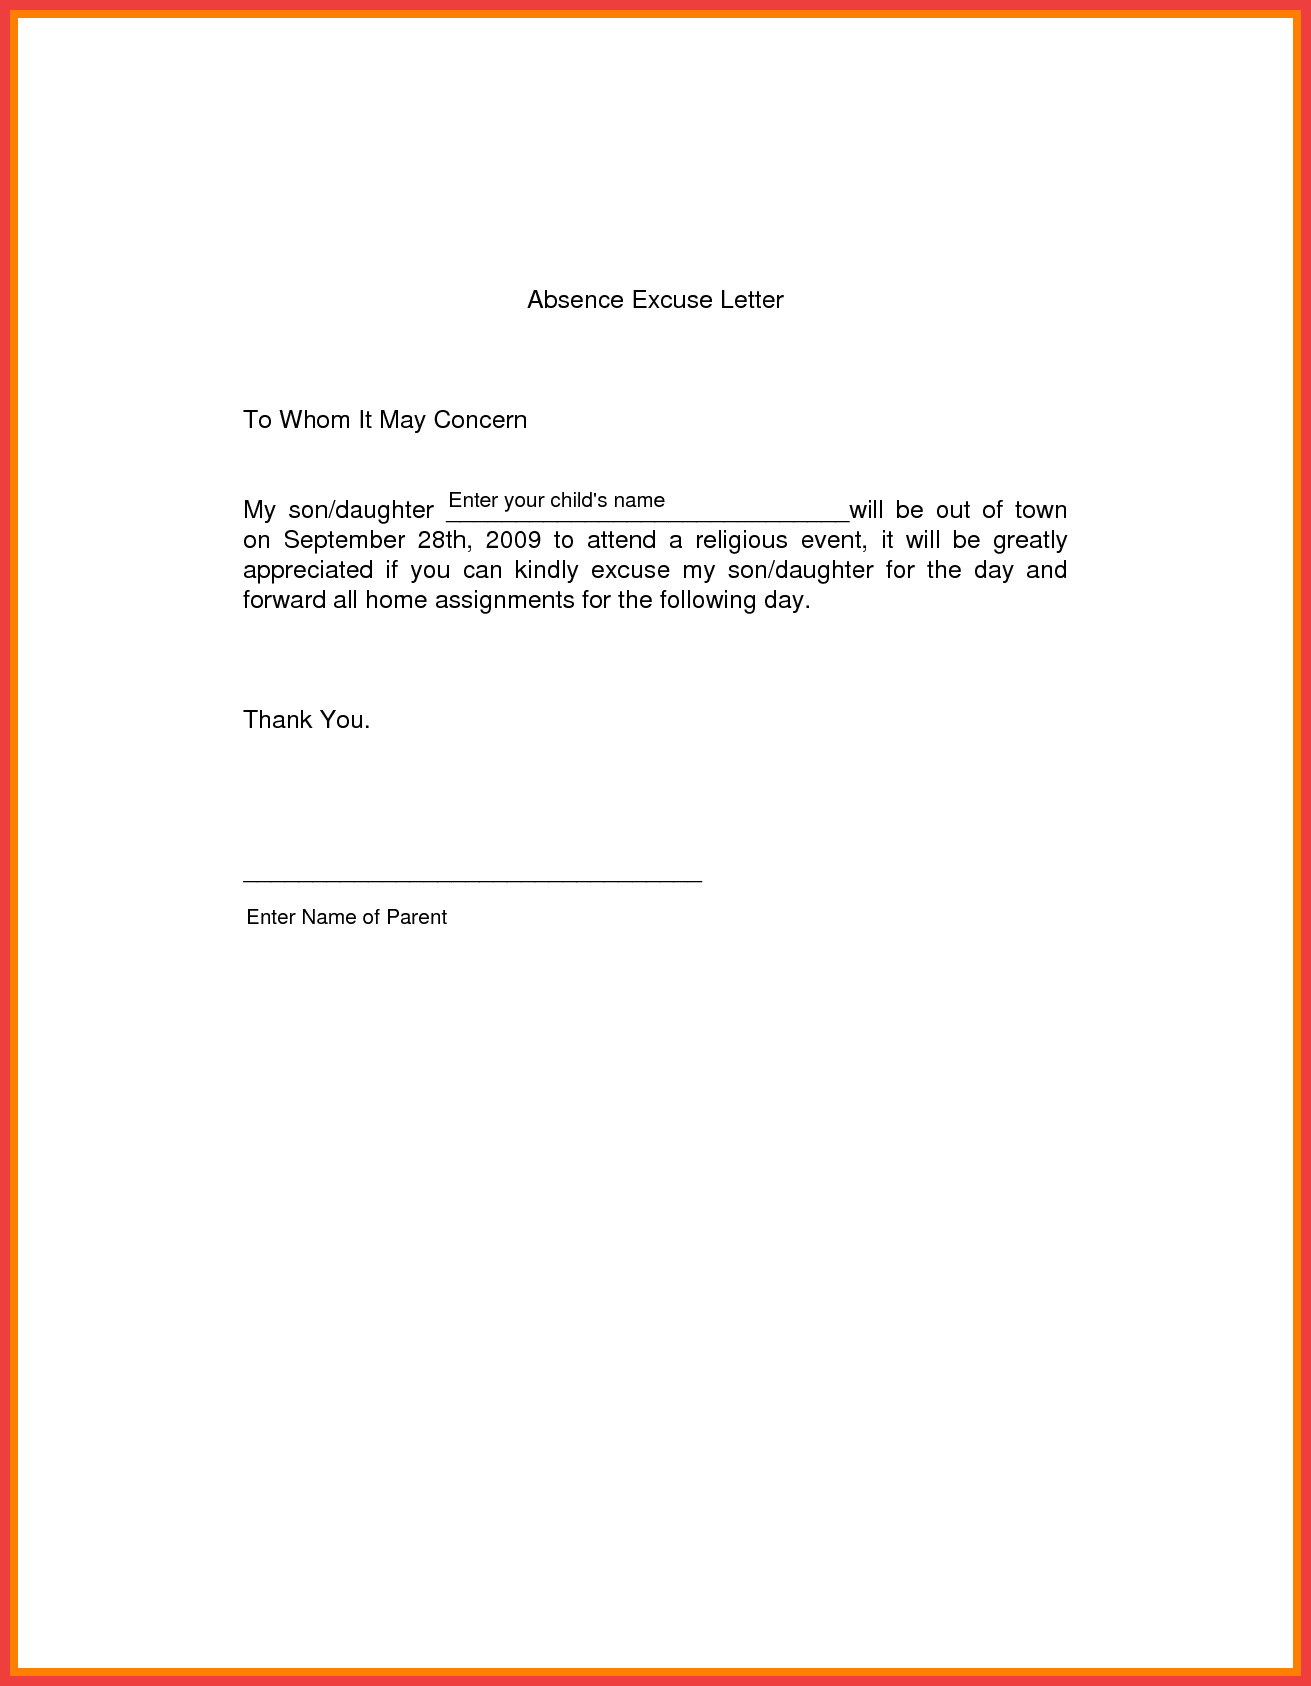 Absent Letters for School School Excuse Letter Sample